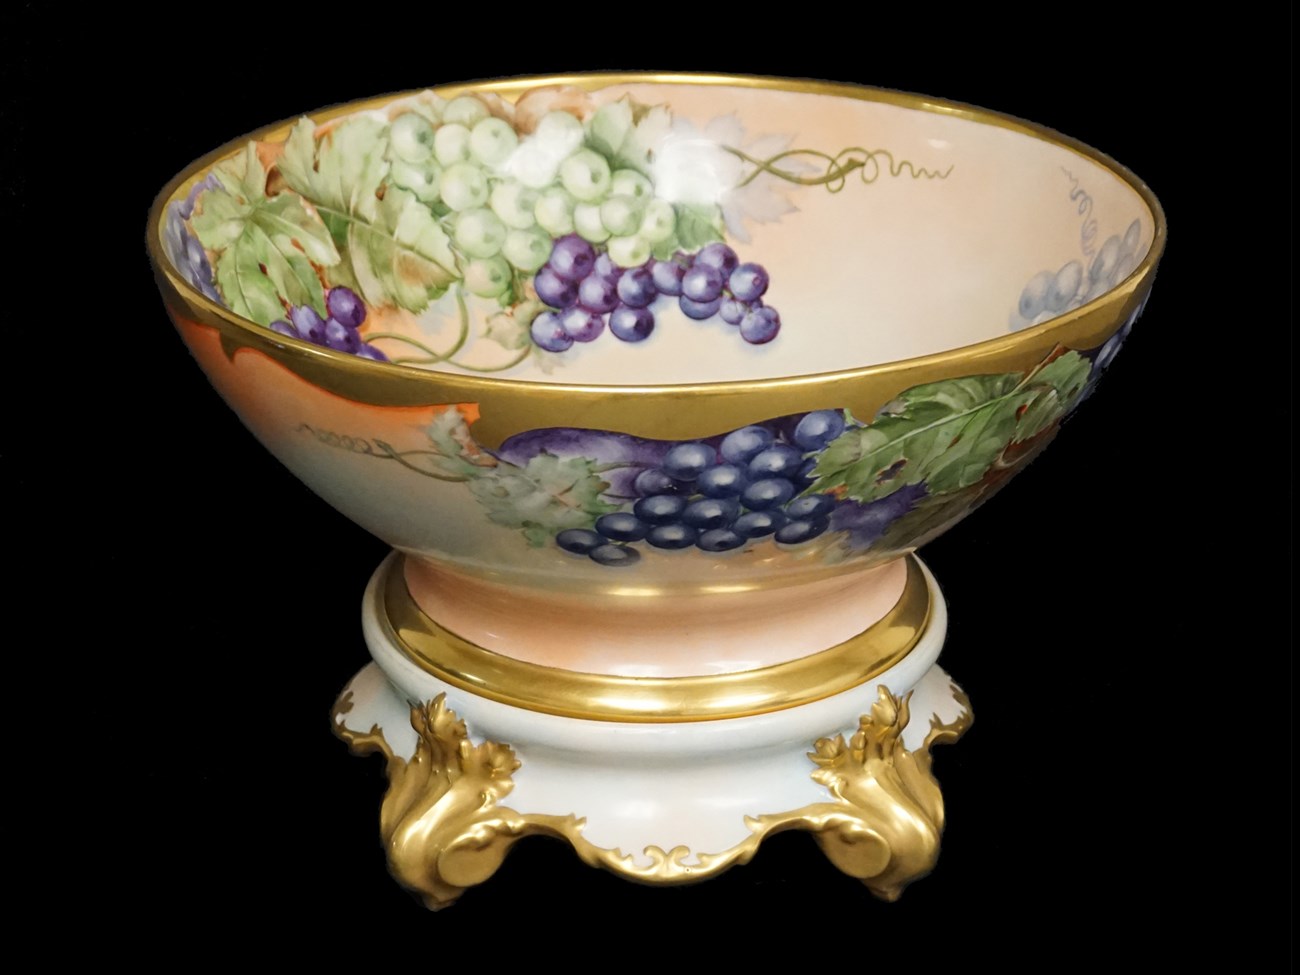 Peach colored bowl on stand with decoration of bunches of grapes